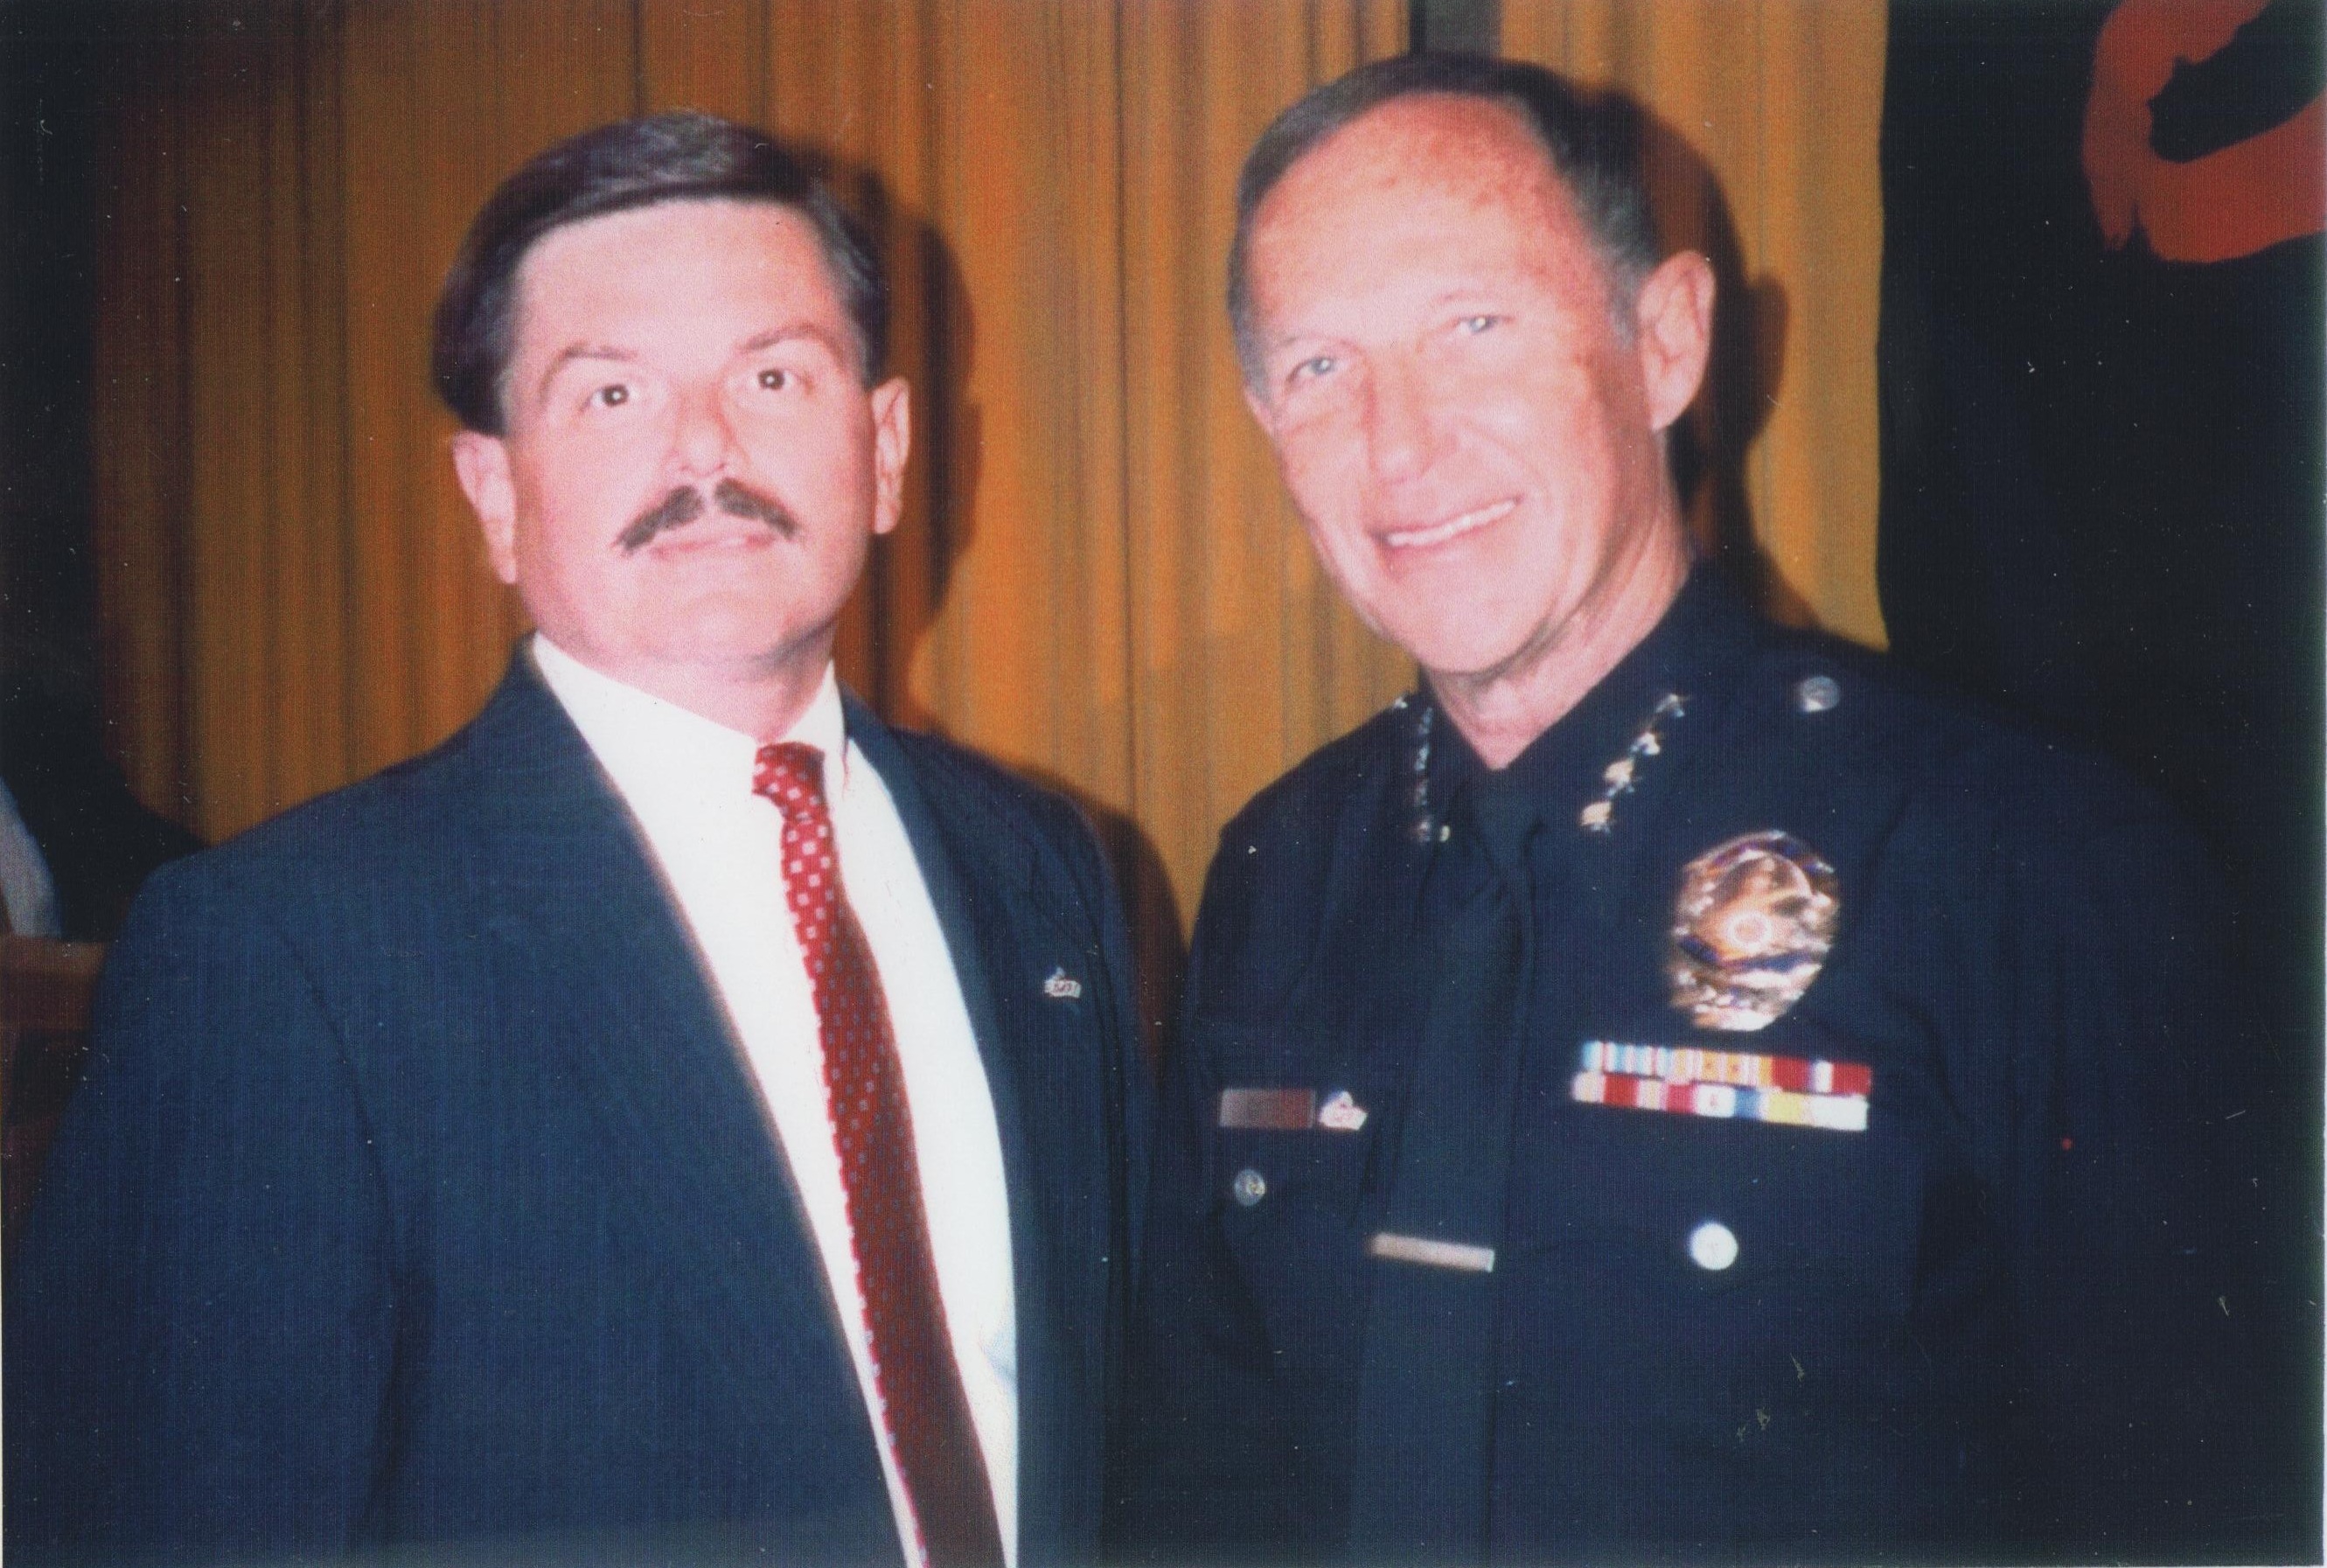 Lew Richard's Award Ceremony in Recognition for his exemplary work for the Los Angeles Police Department with Chief Daryl Gates